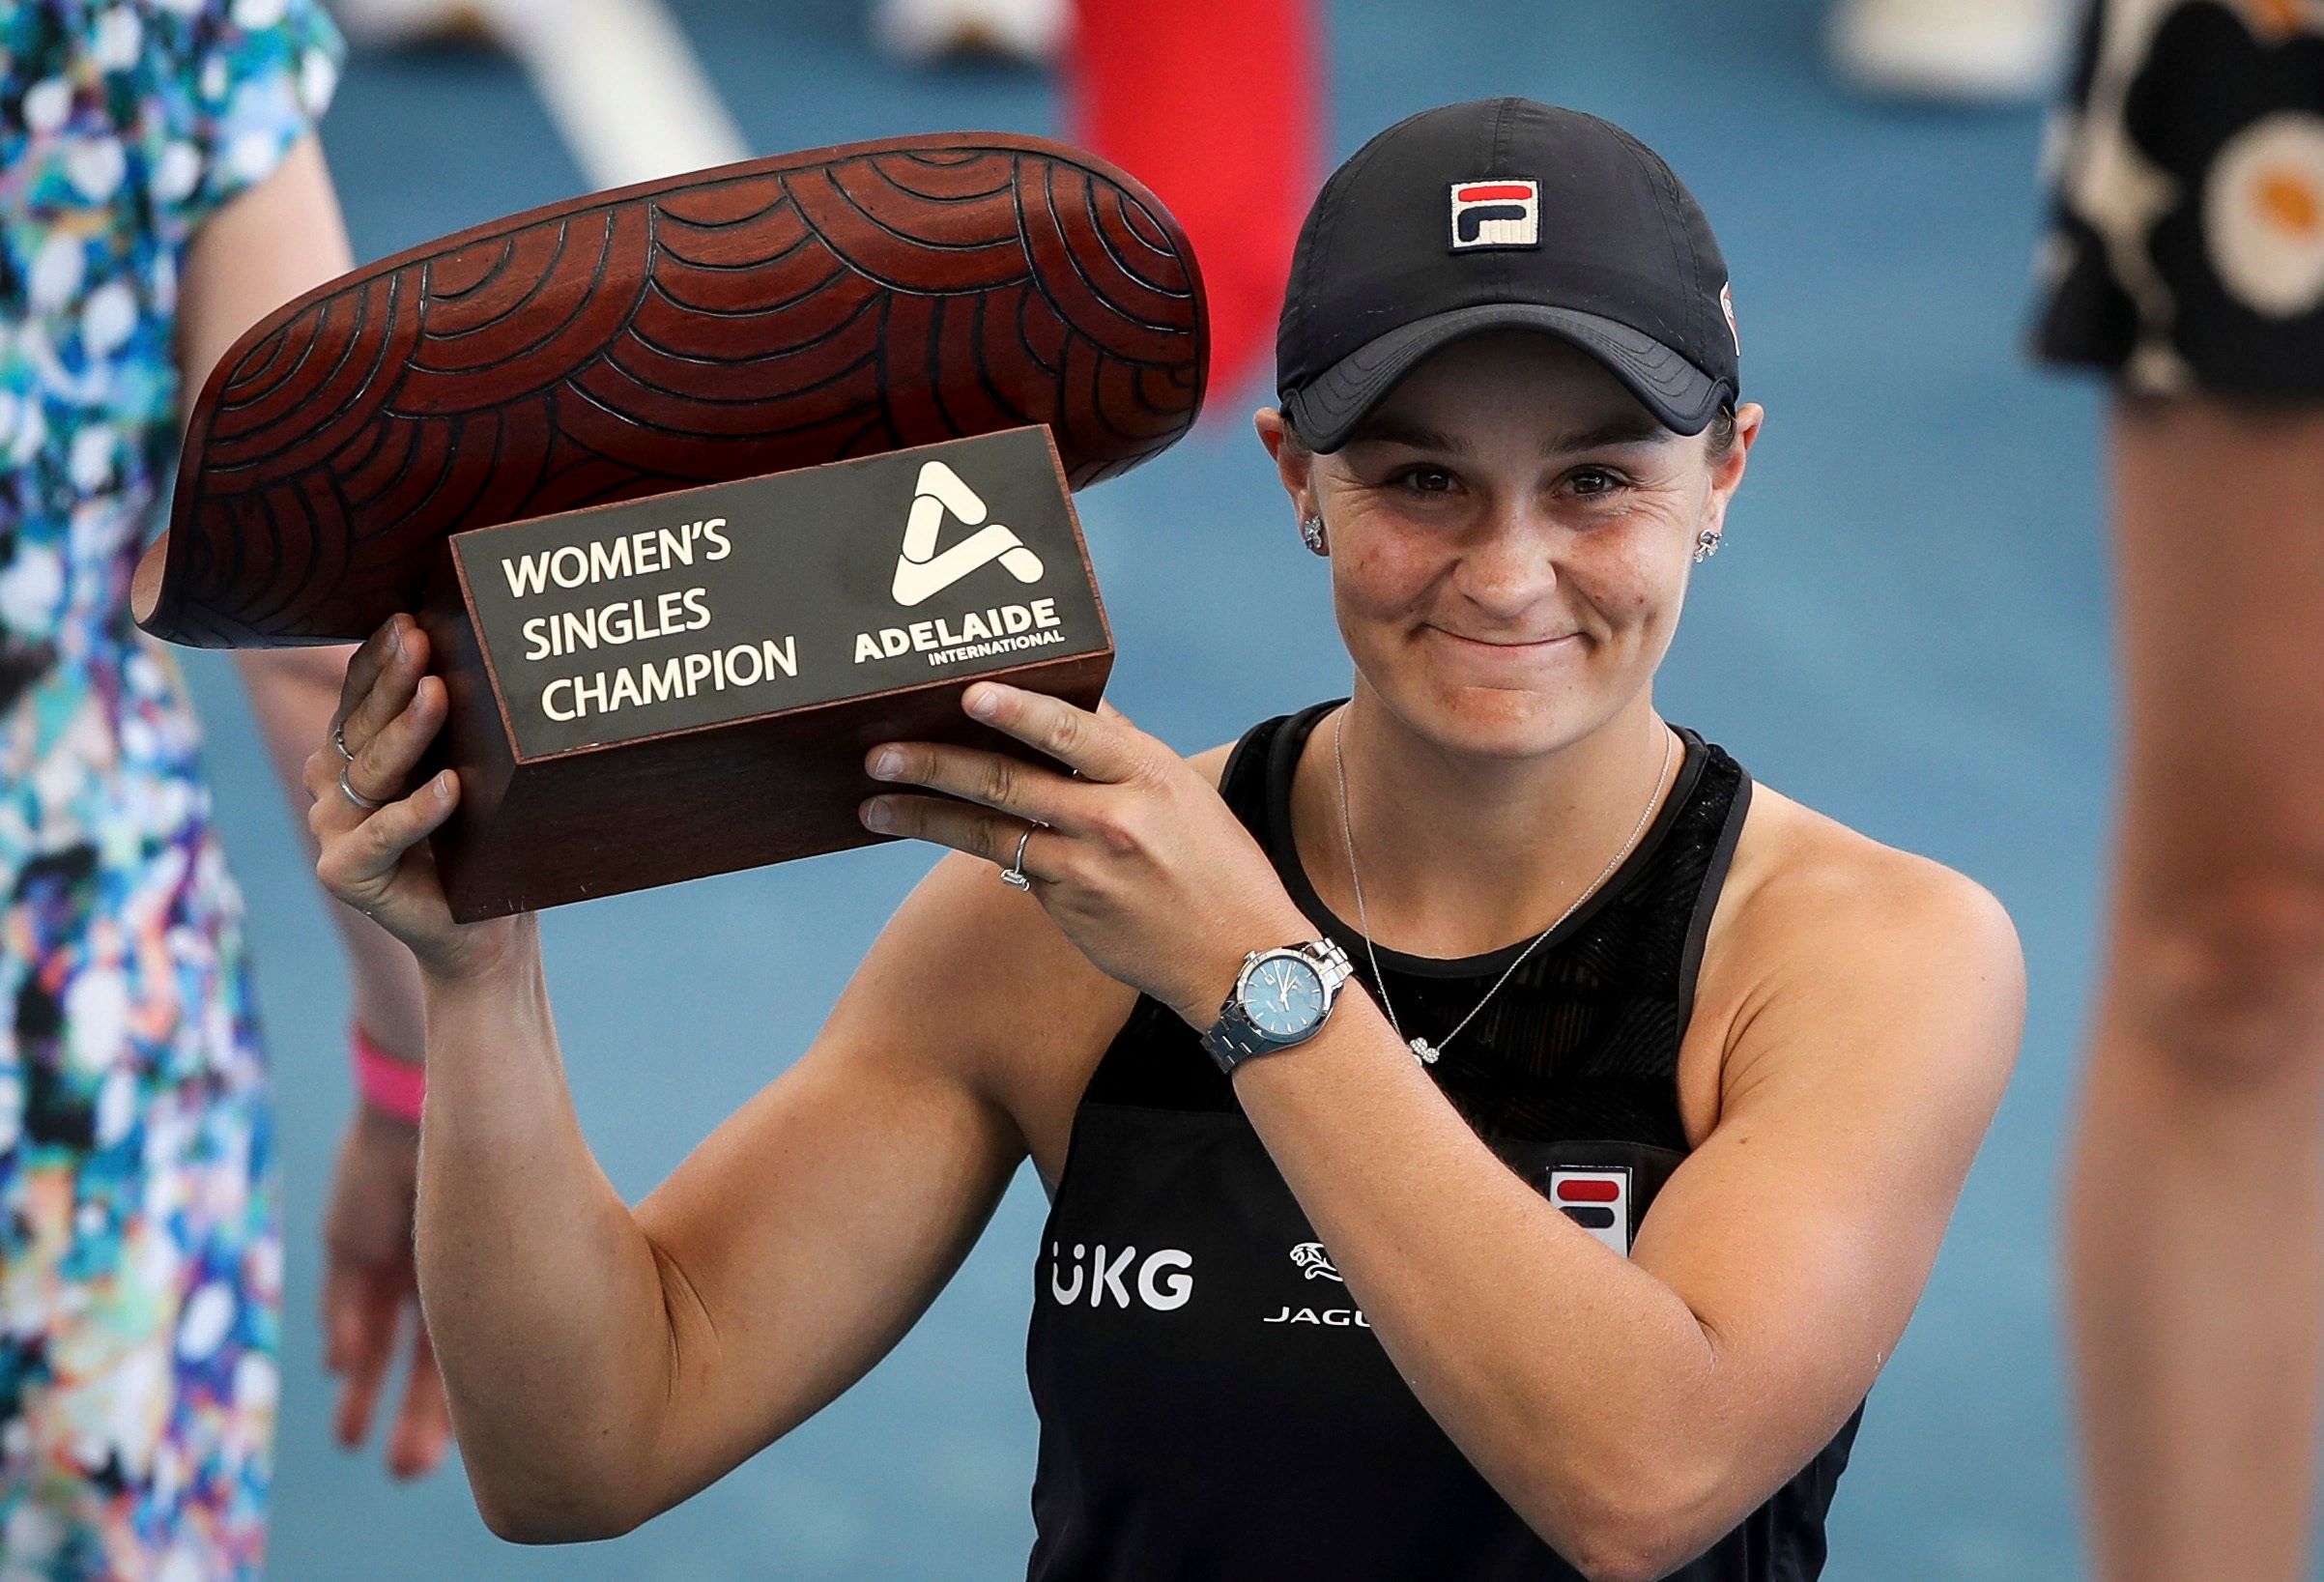 Our No 1: World reacts to Australian tennis player Ashleigh Barty’s retirement